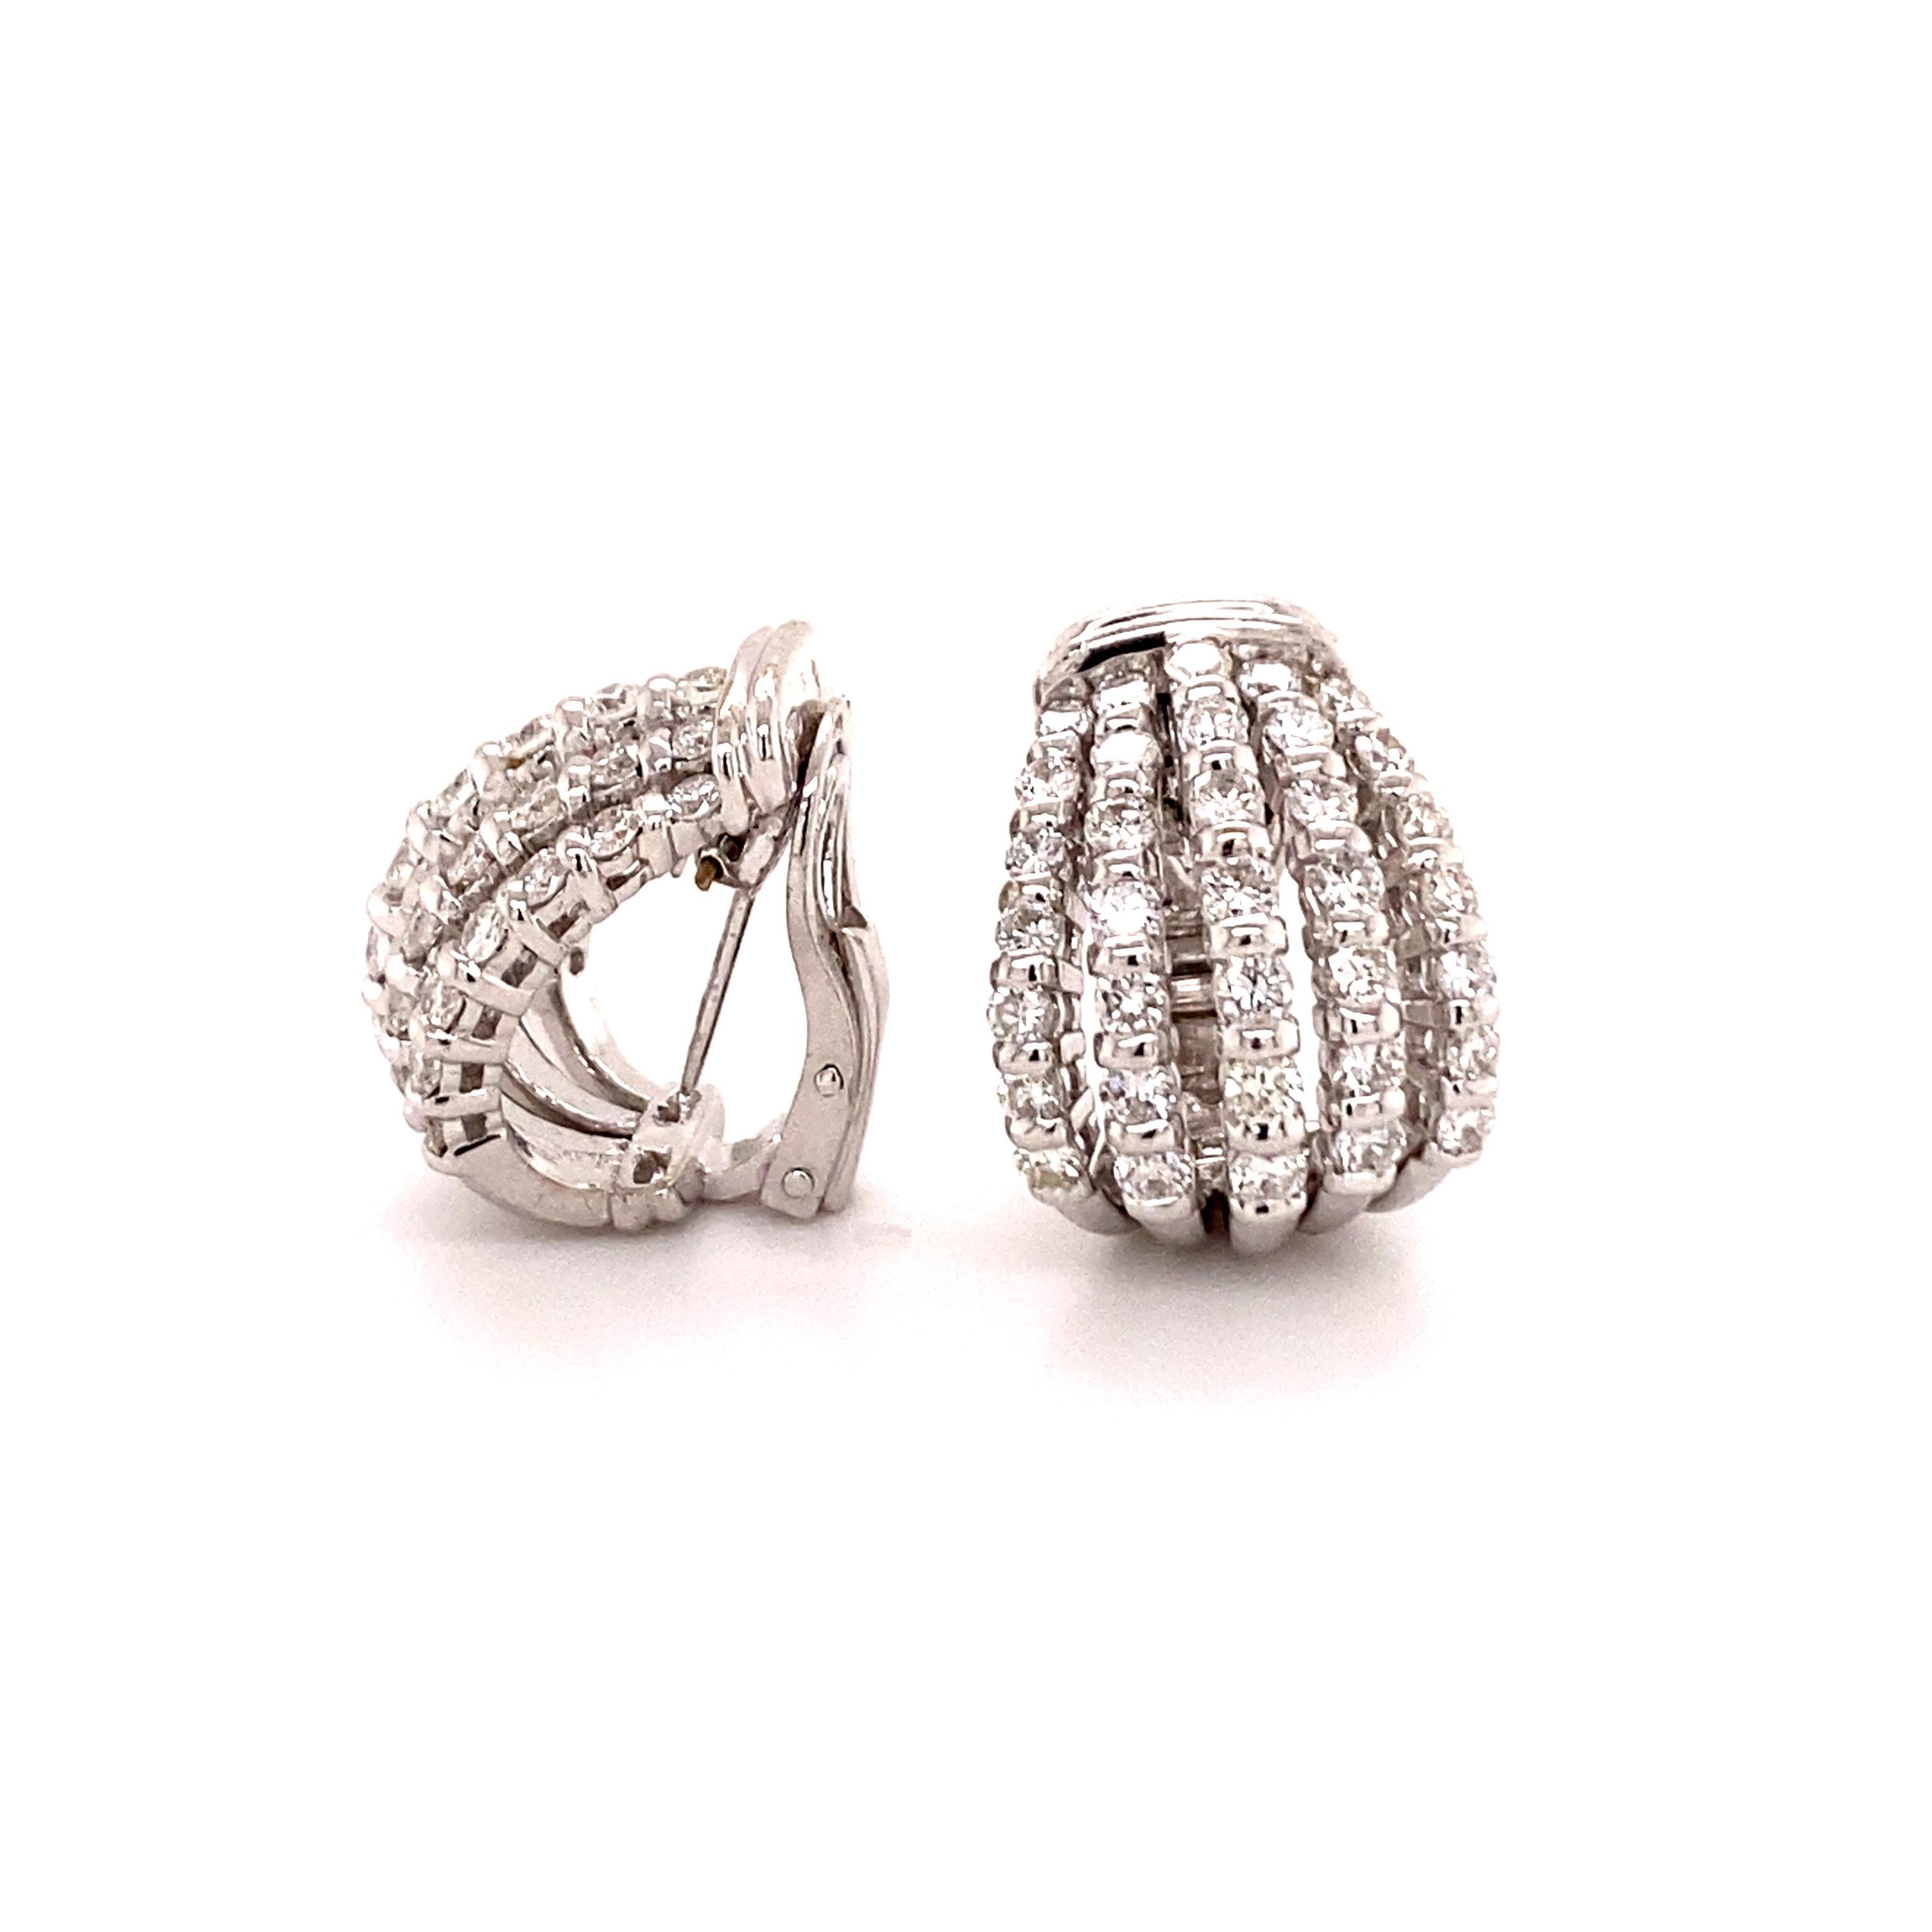 These dazzling earclips in 18 karat white gold are set with 70 brilliant-cut diamonds of G/H colour and vs/si clarity, total weight approximately 2.80 carats.
The diamonds are arranged in five slightly spaced and forward-curving vertical rows. Each